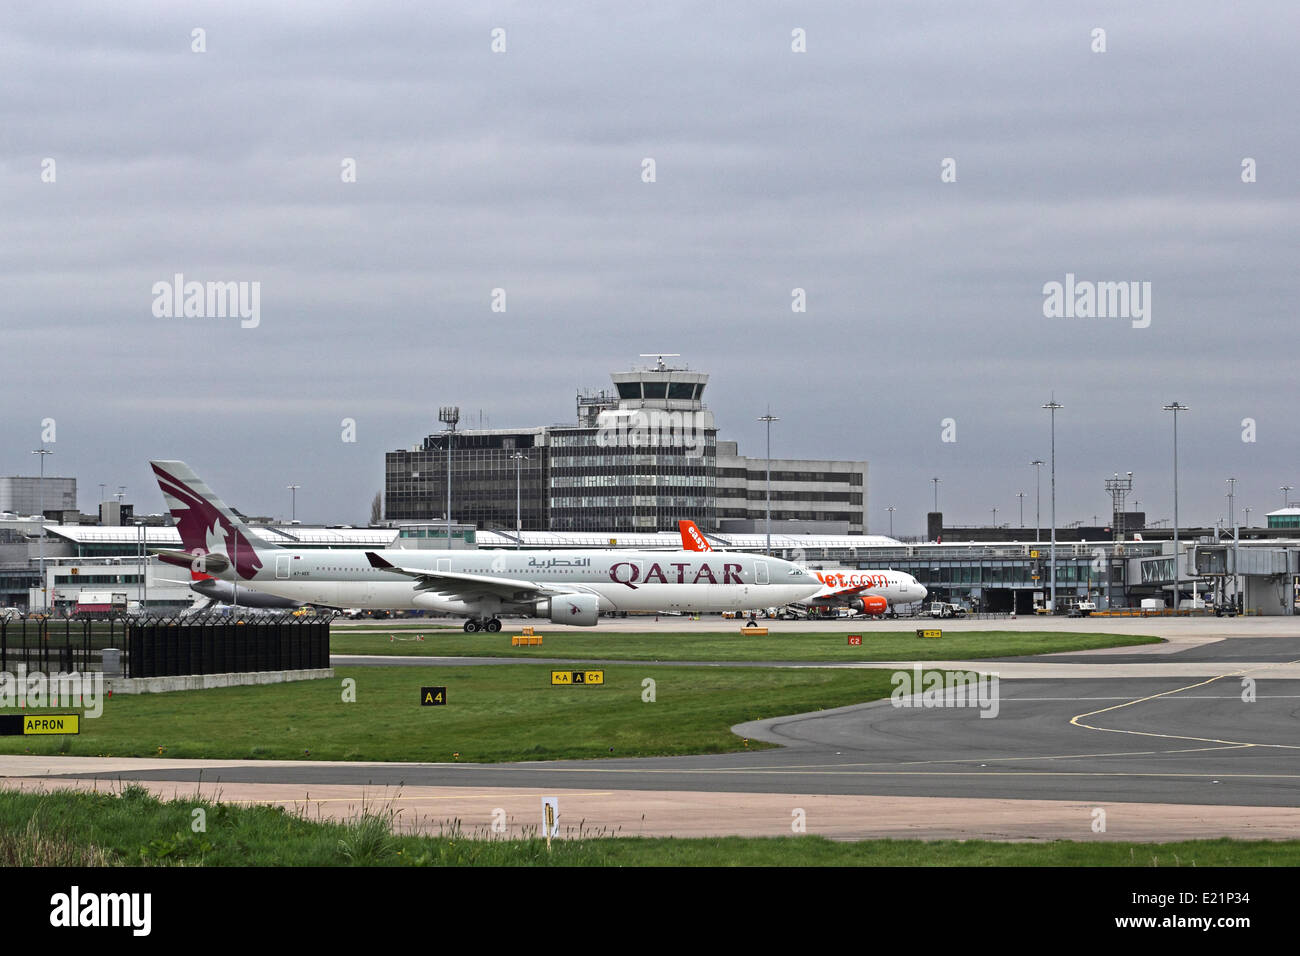 Manchester Airport, England, with Qatar Airways Airbus A330 in foreground Stock Photo